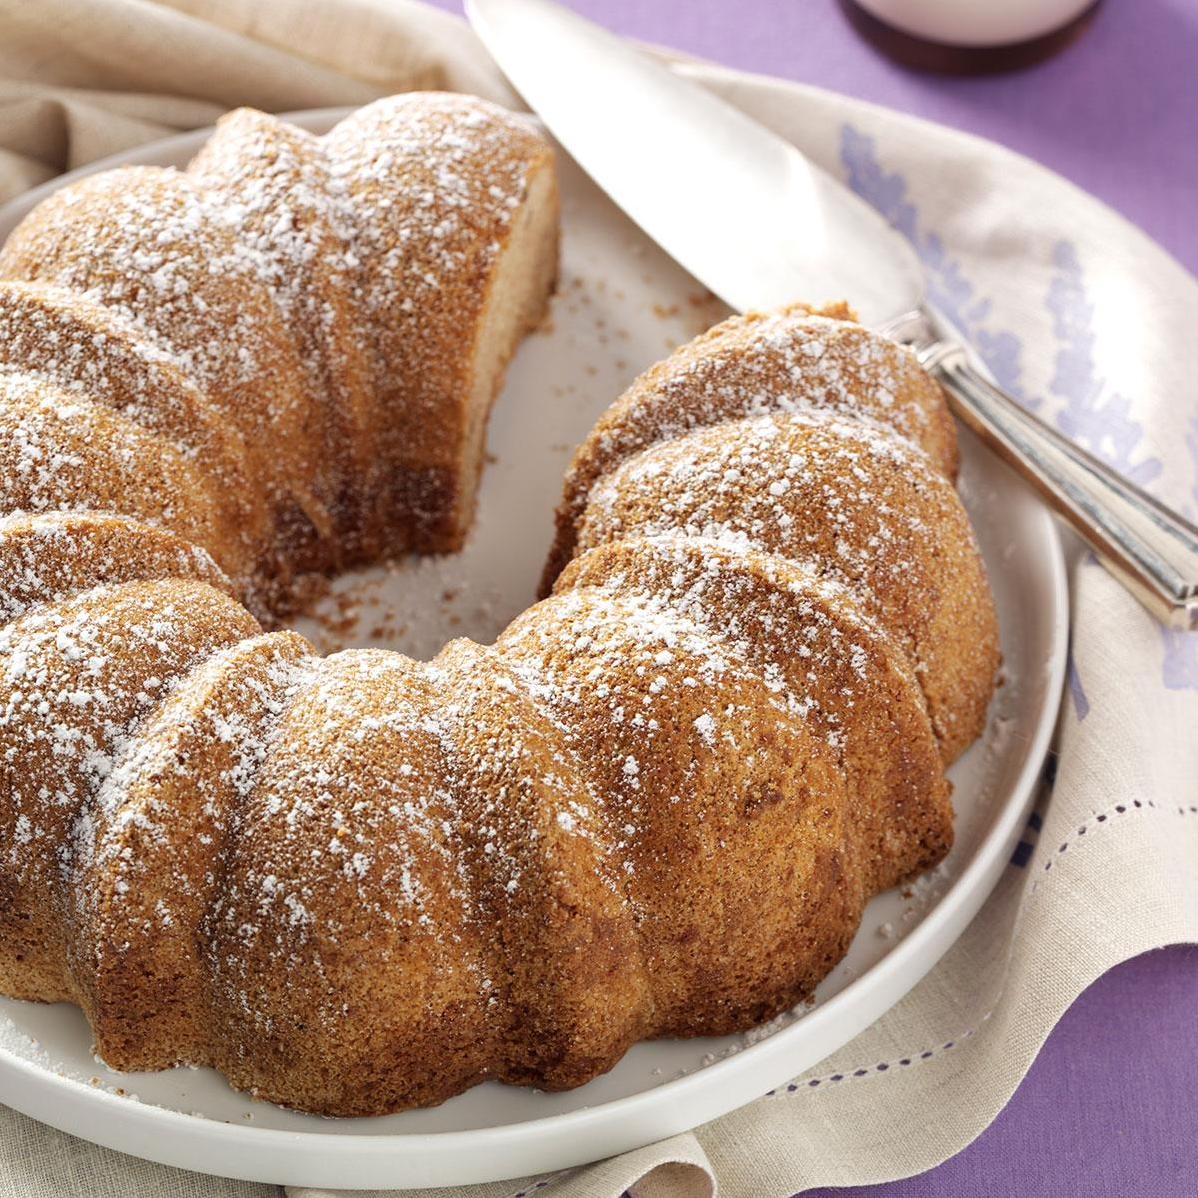  Sweeten up your coffee cake with this delightful sugarplum filling!